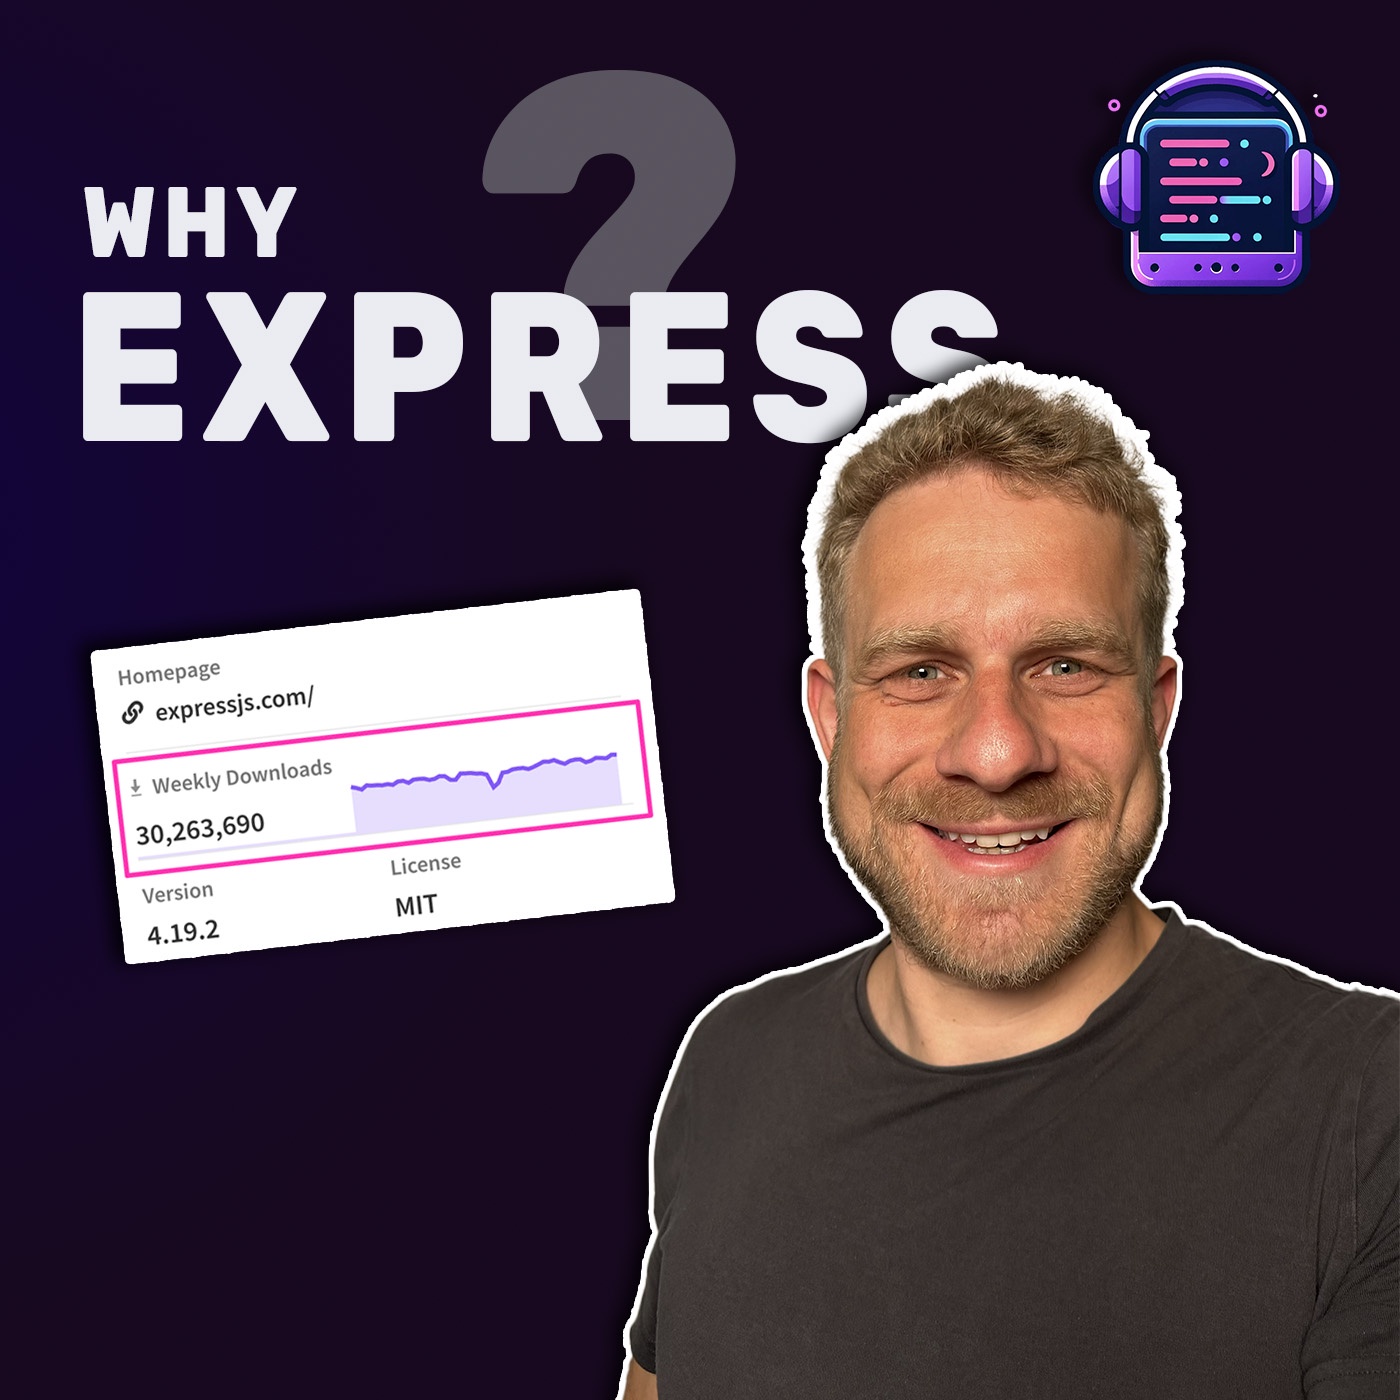 Why Express.js?